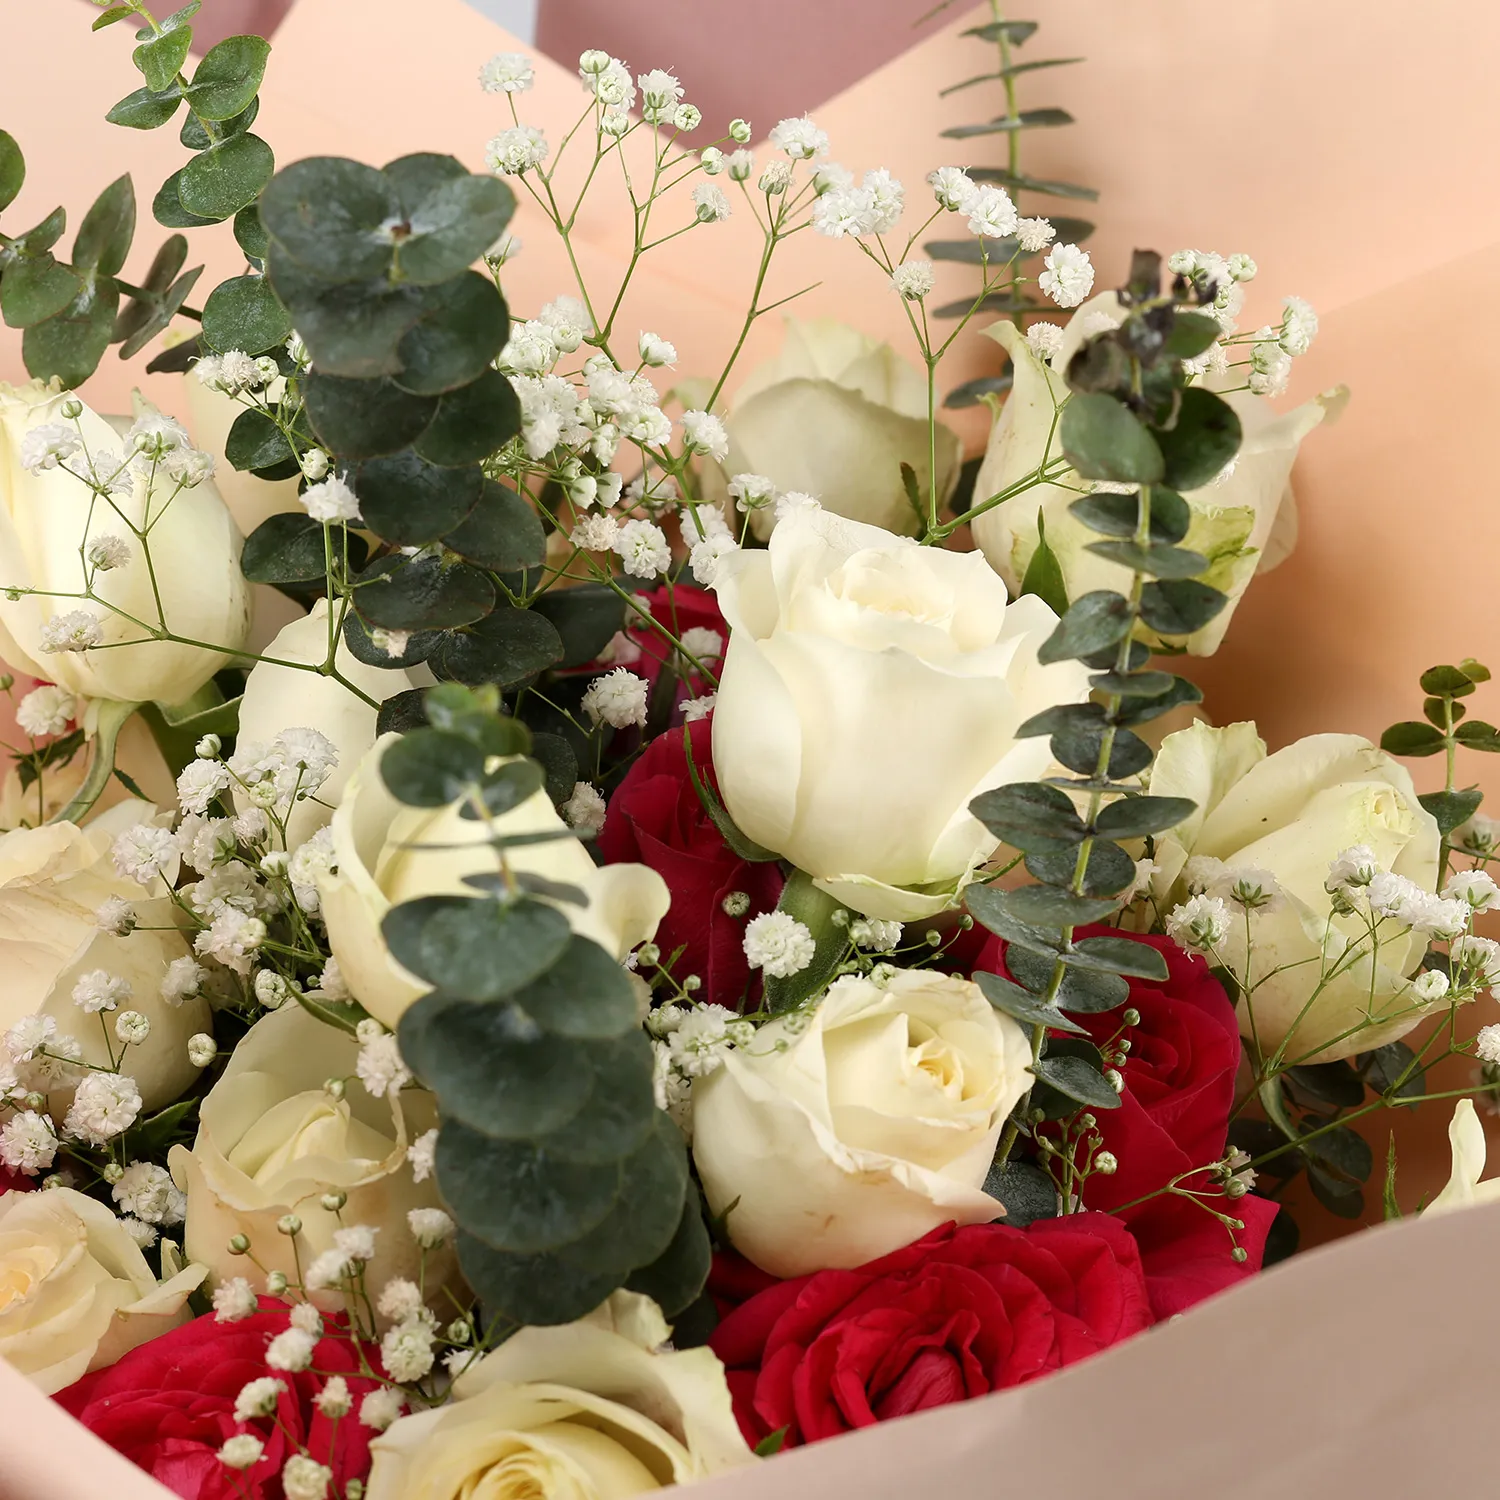 A Rose Flower Bouquet for Every Occasion